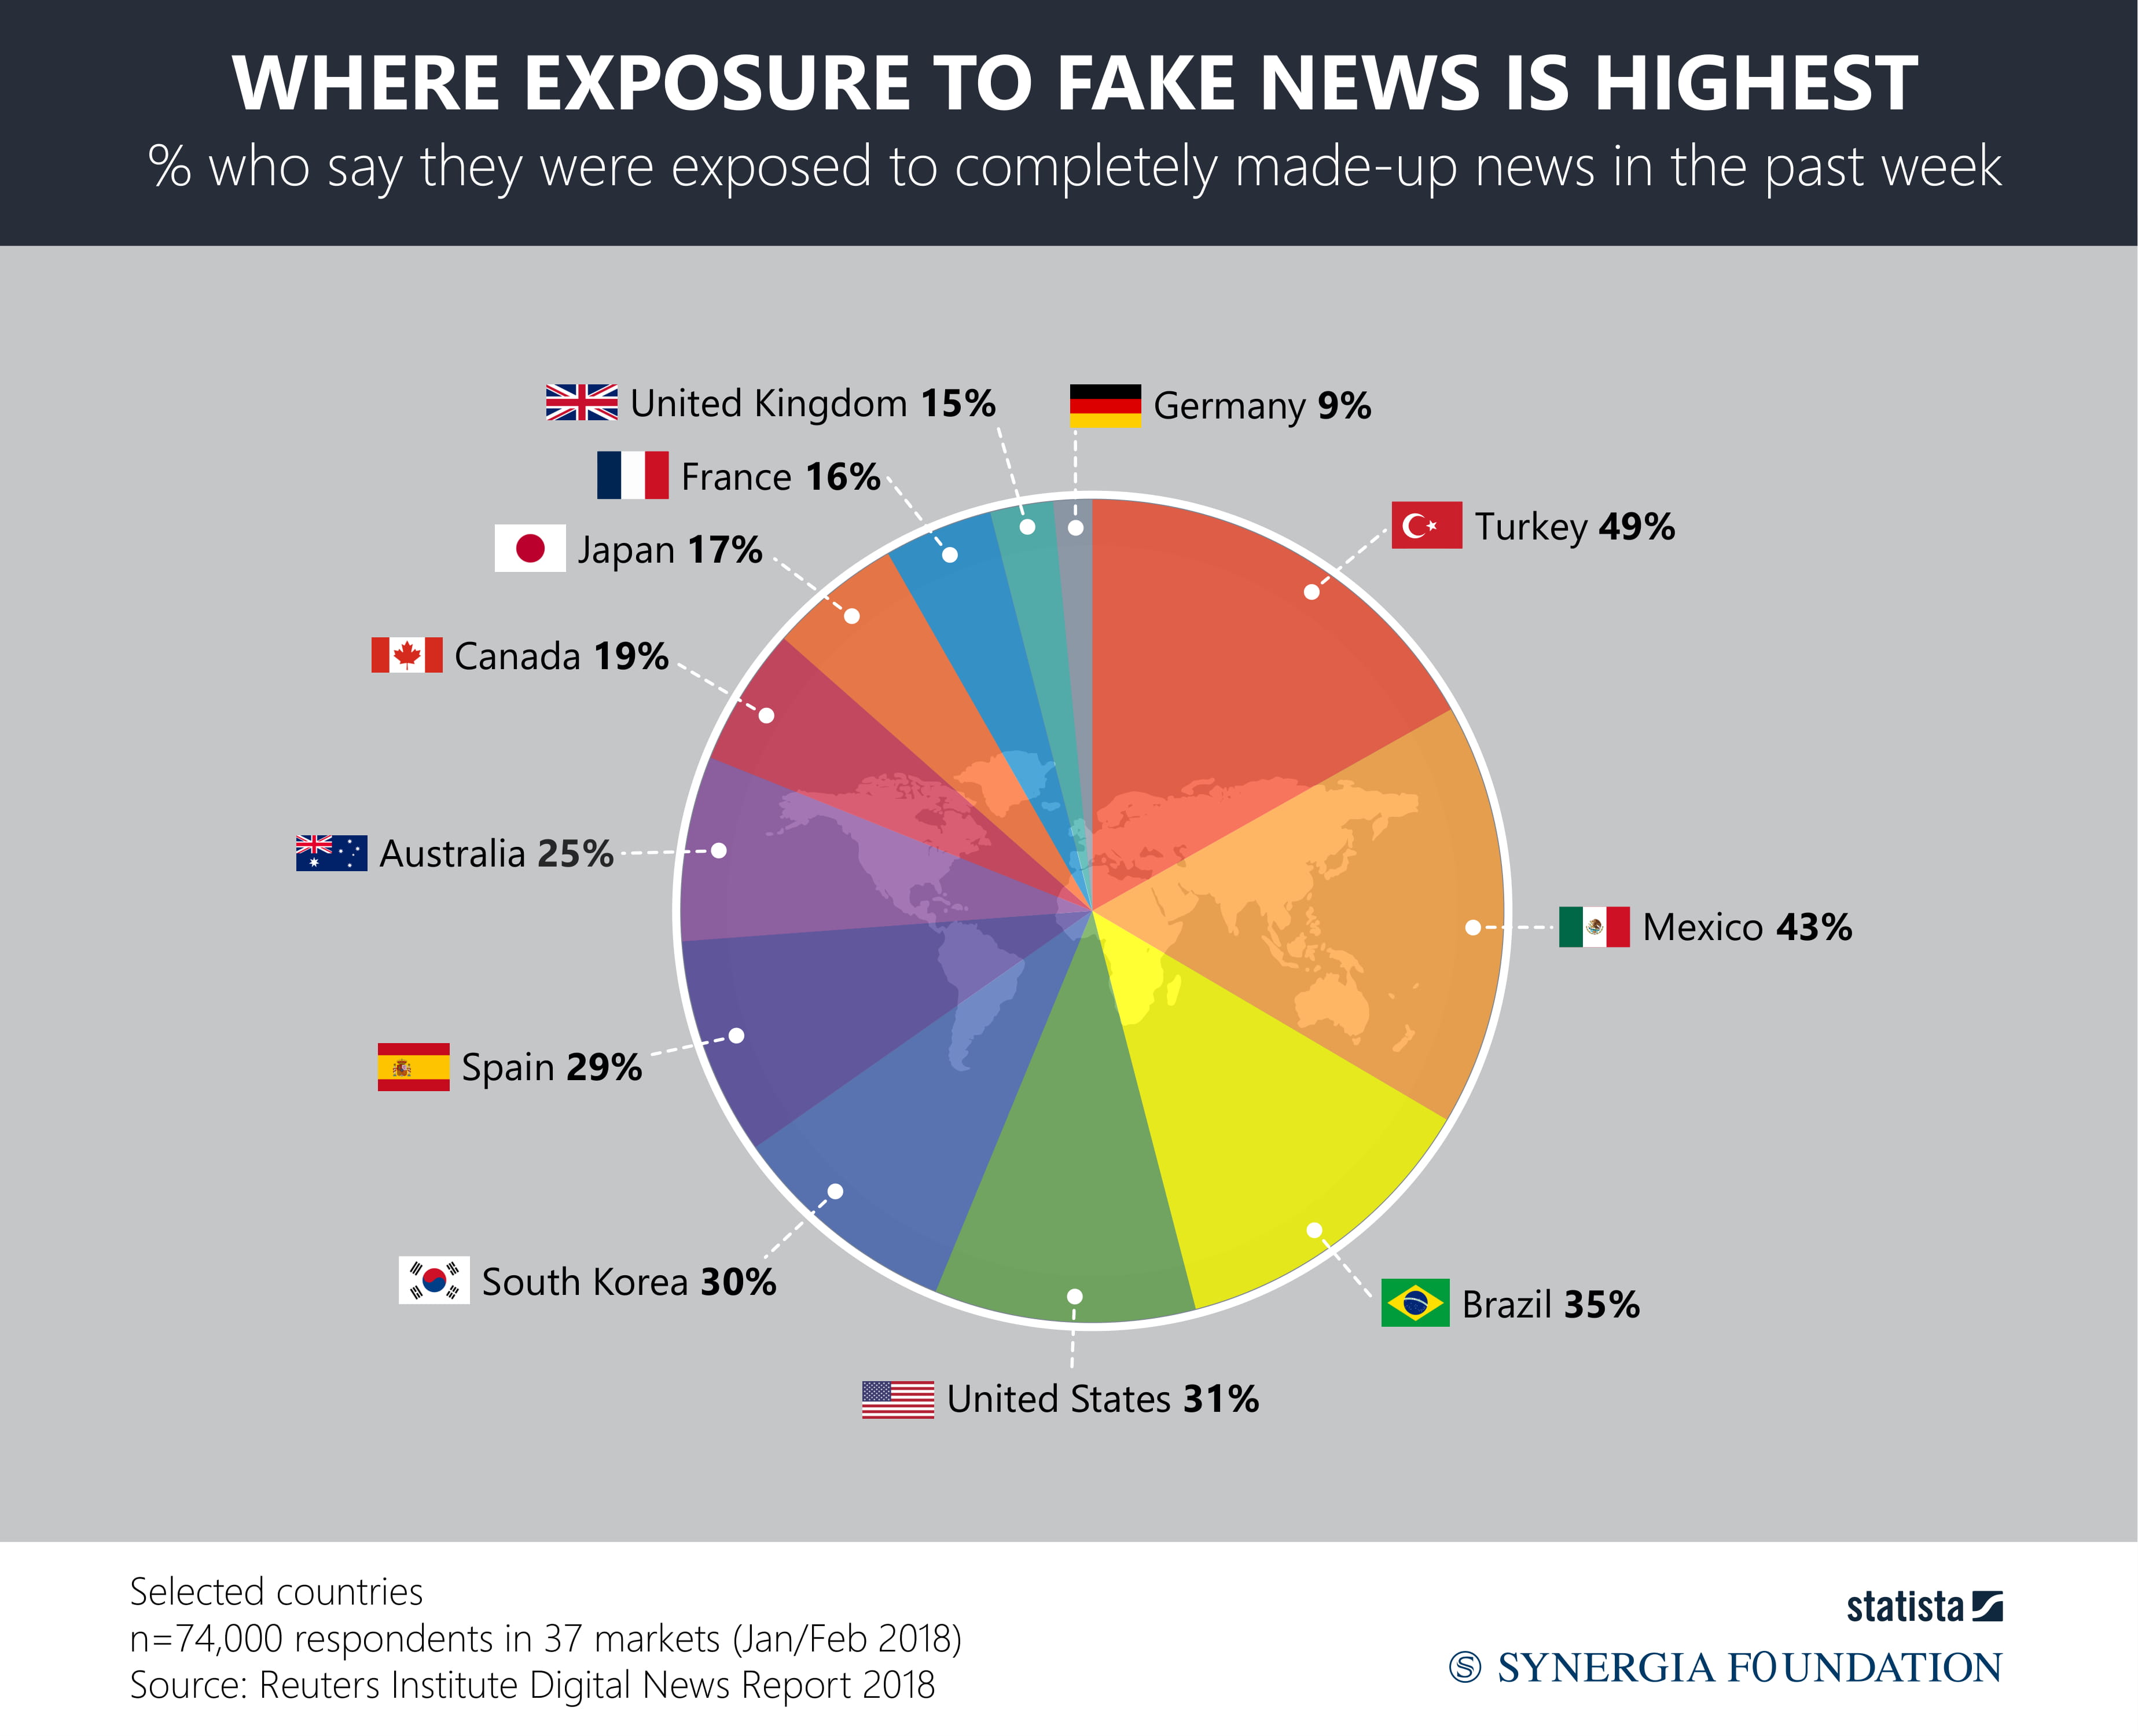 Where Exposure to Fake News is Highest